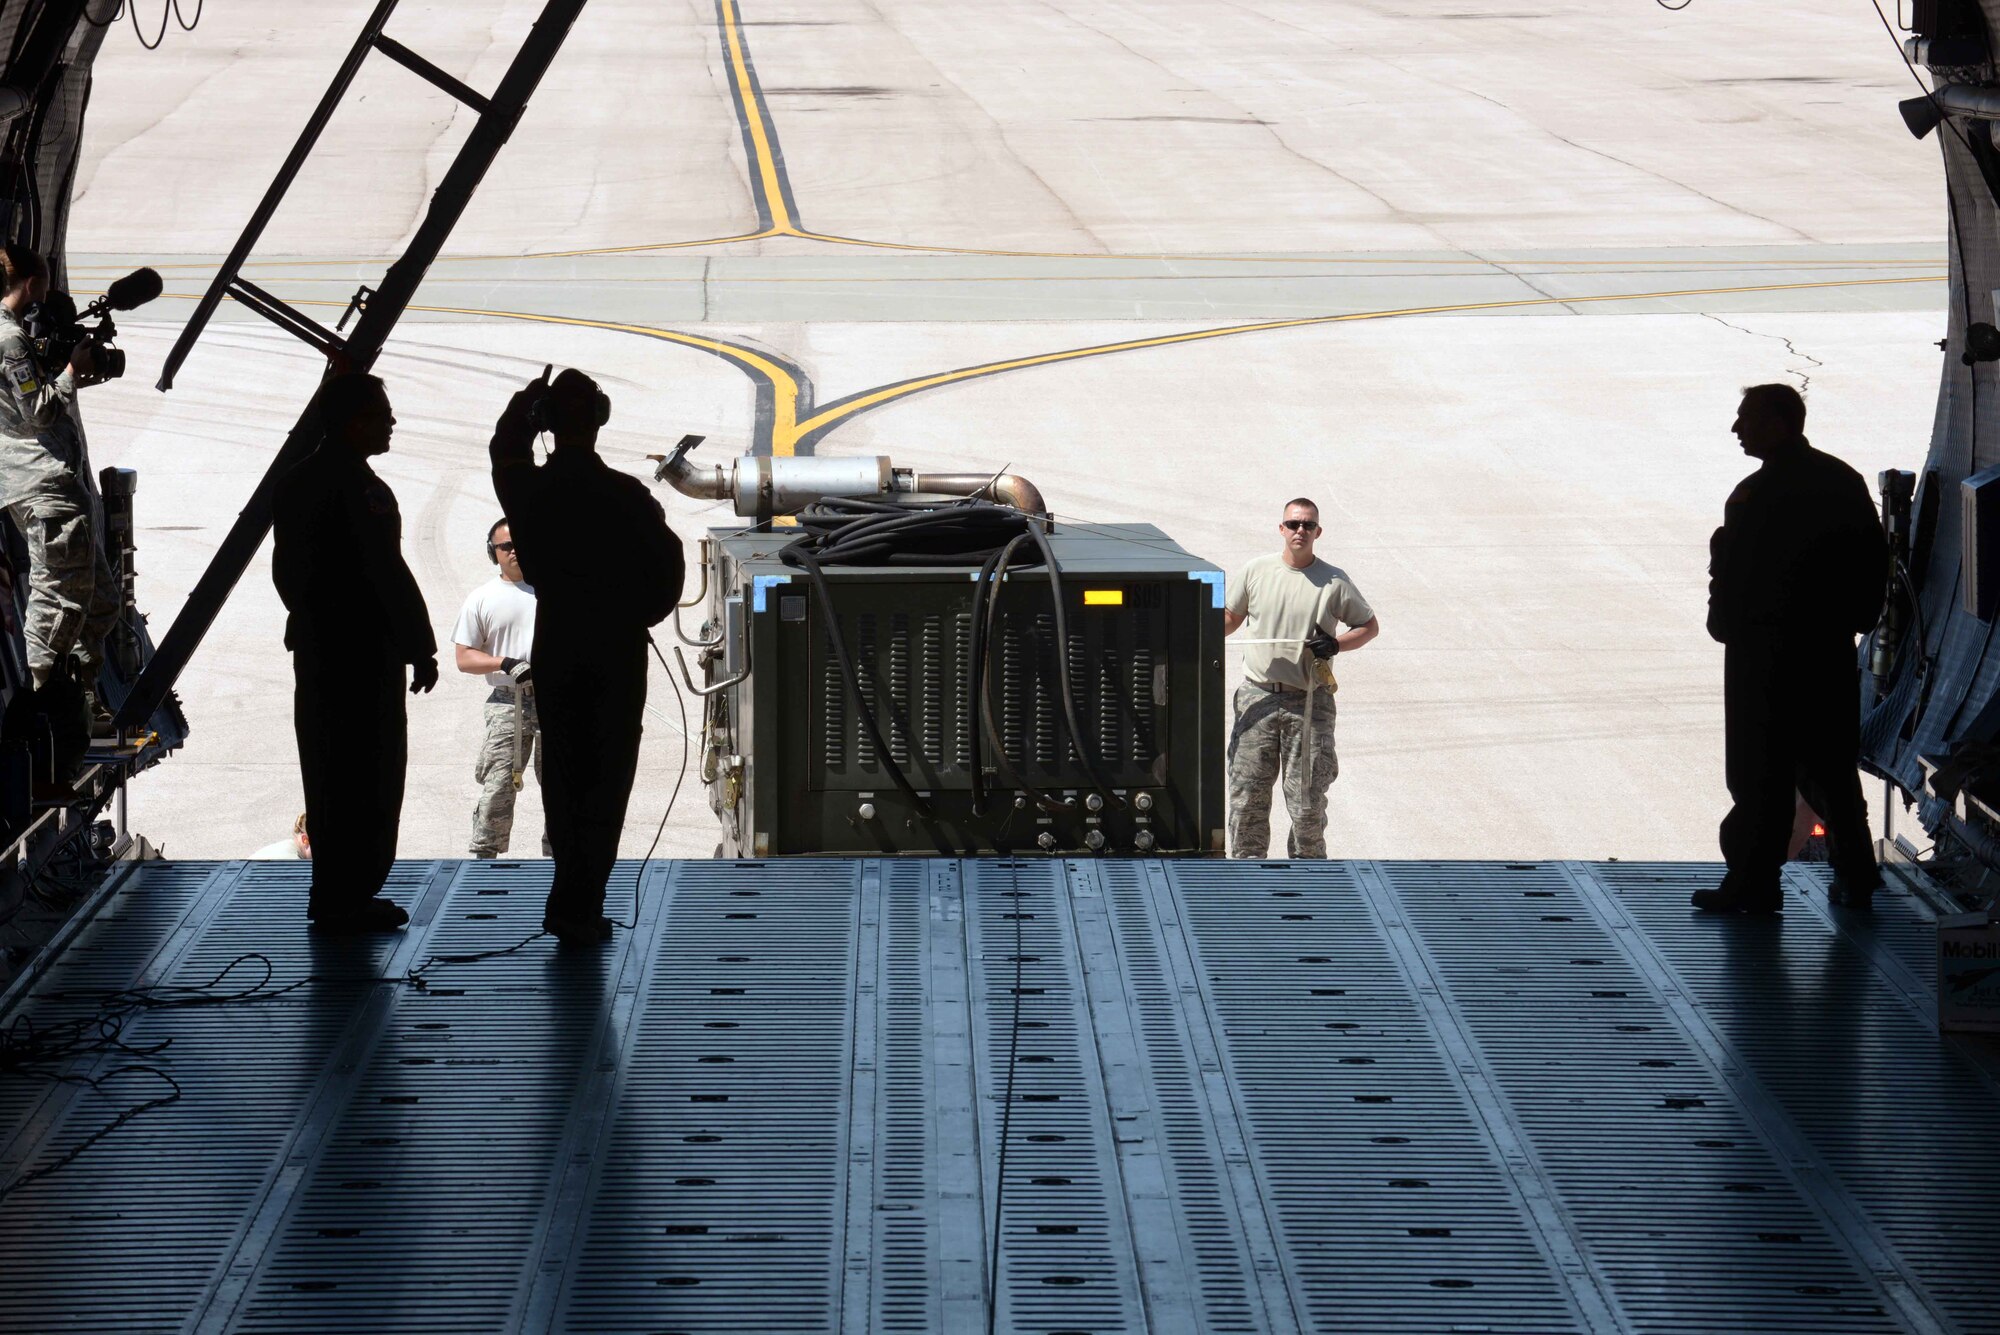 Airmen with the 28th Aircraft Maintenance Squadron load equipment into a C-5 Galaxy from Travis Air Force Base (AFB), Calif., at Ellsworth AFB, S.D., Aug. 4, 2016. The equipment is being transported from Ellsworth AFB to Andersen AFB, Guam, where it will be used to support B-1 bombers as they provide U.S. Pacific Command a global strike and extended deterrence capability. (U.S. Air Force photo by Airman Donald Knechtel) 